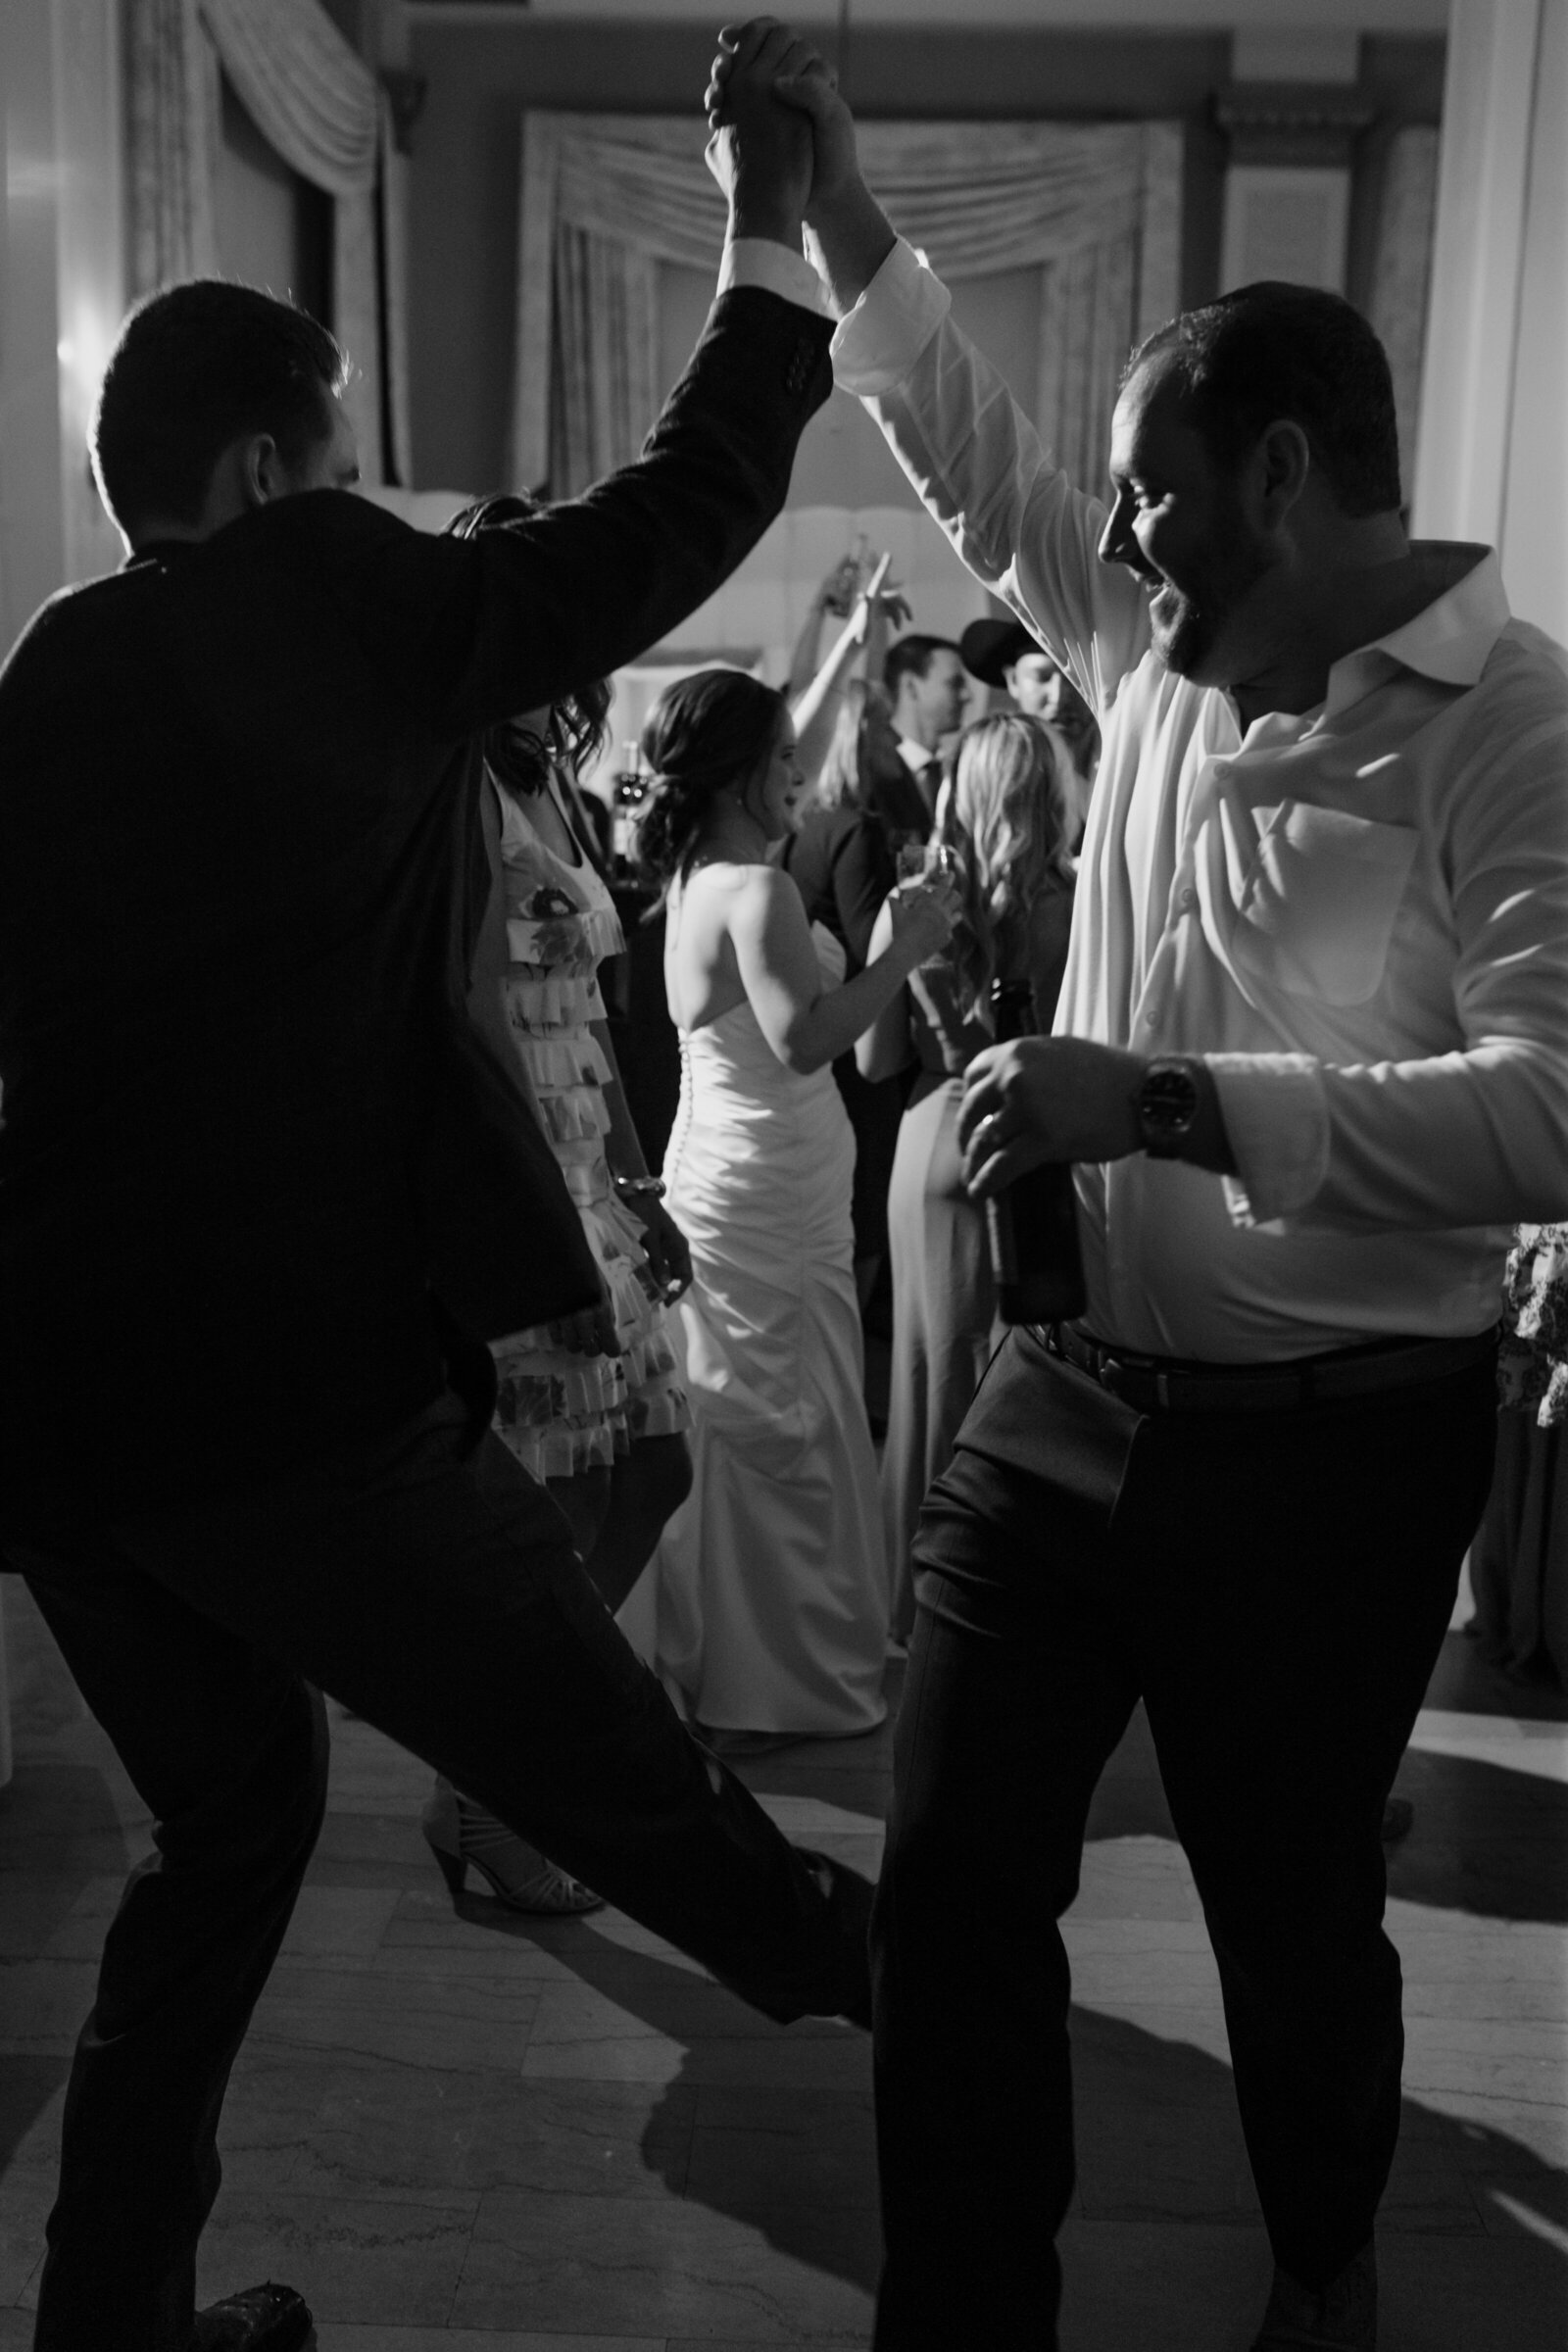 The bride dances with two guests during a hotel wedding reception